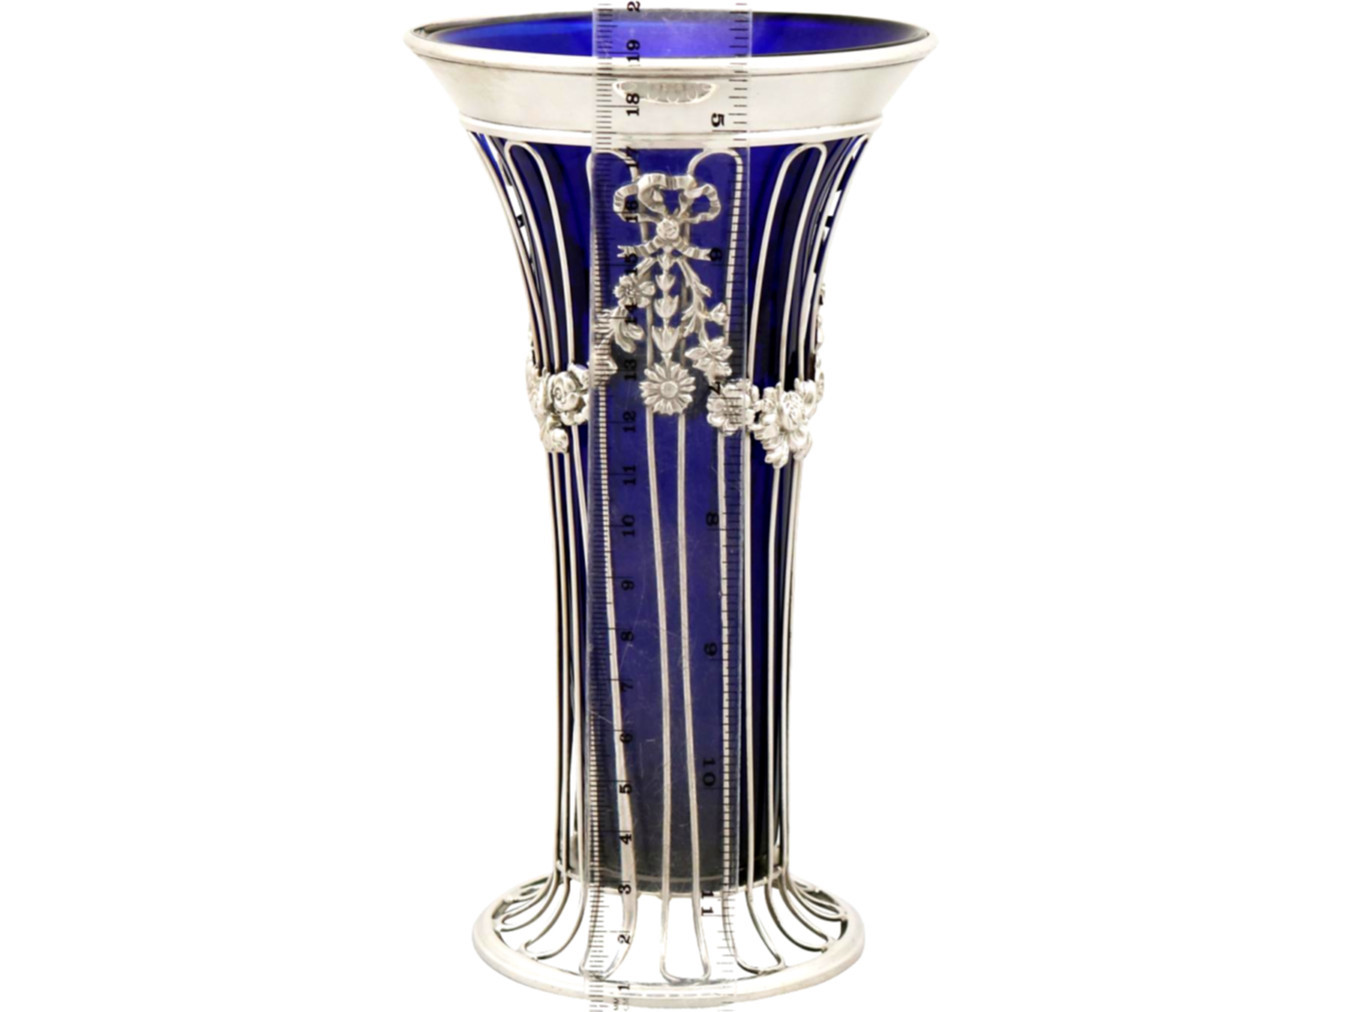 5 x 10 cylinder vase of the biggest contribution of silver glass vase to humanity silver in 1904 antique edwardian sterling silver and glass vase for sale at